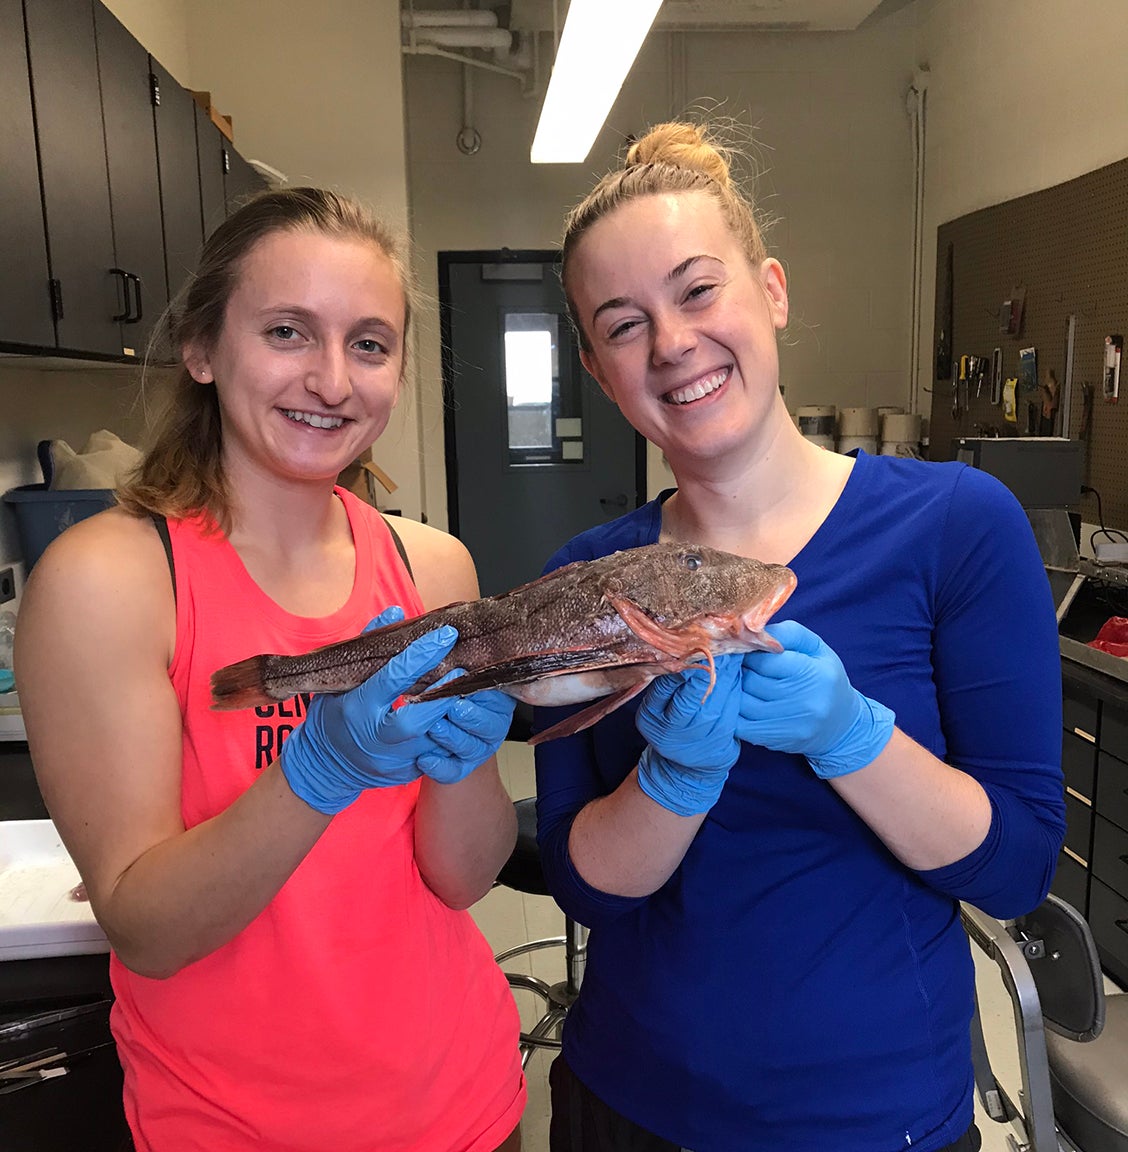 Graduate students Annie Innes-Gold and Maggie Heinichen pose with a fish in a lab.